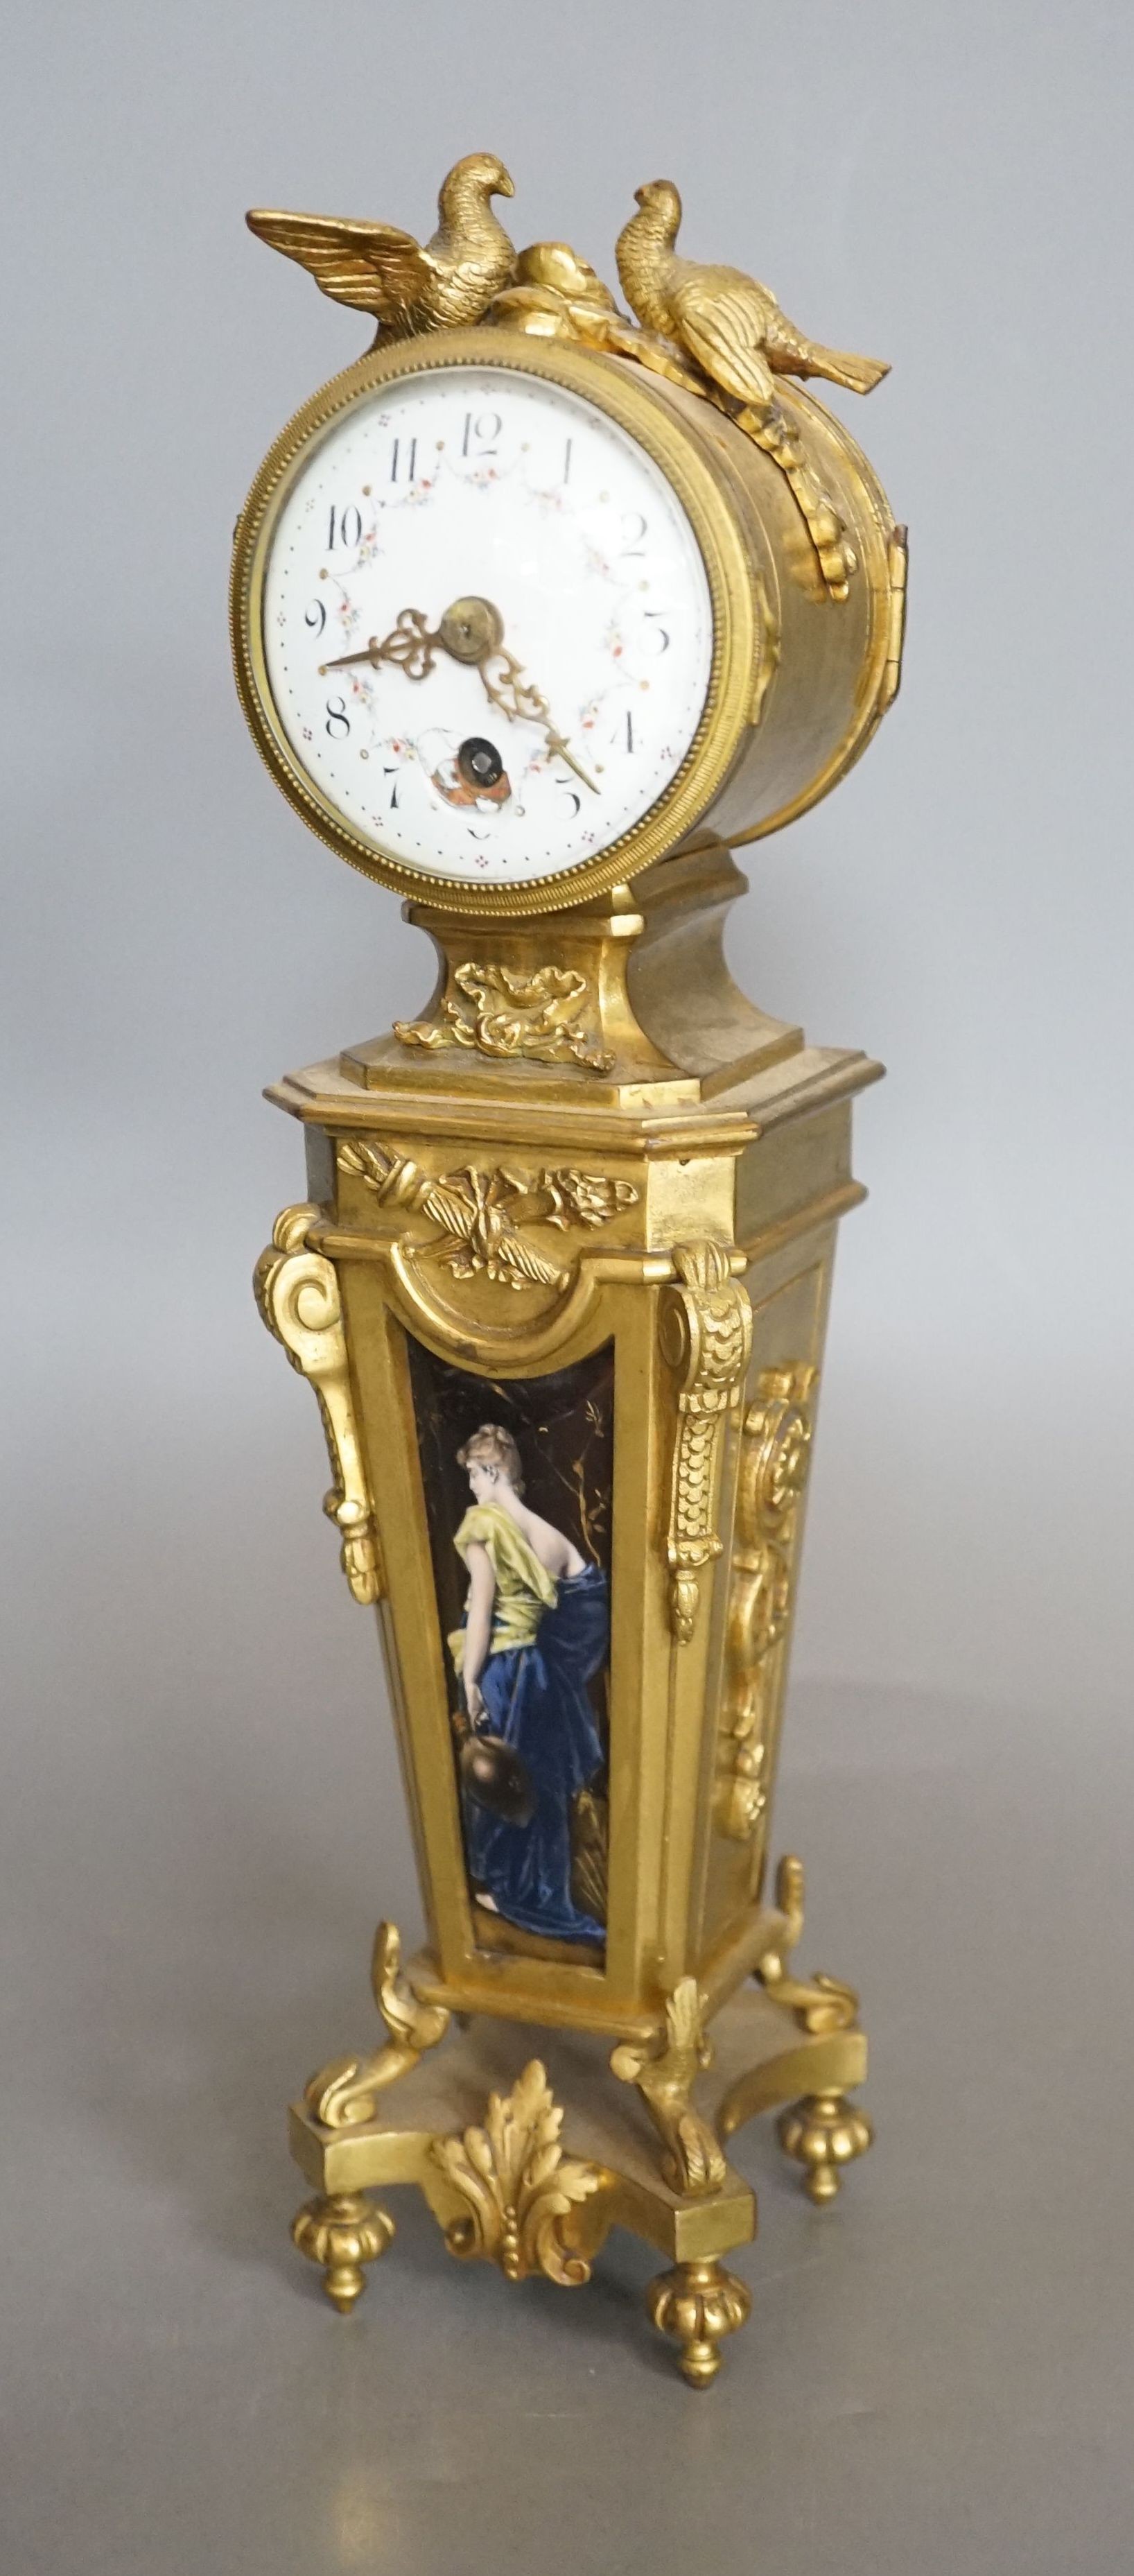 A French ormolu and Limoges enamel mantel timepiece, c.1900 - 31cm tall